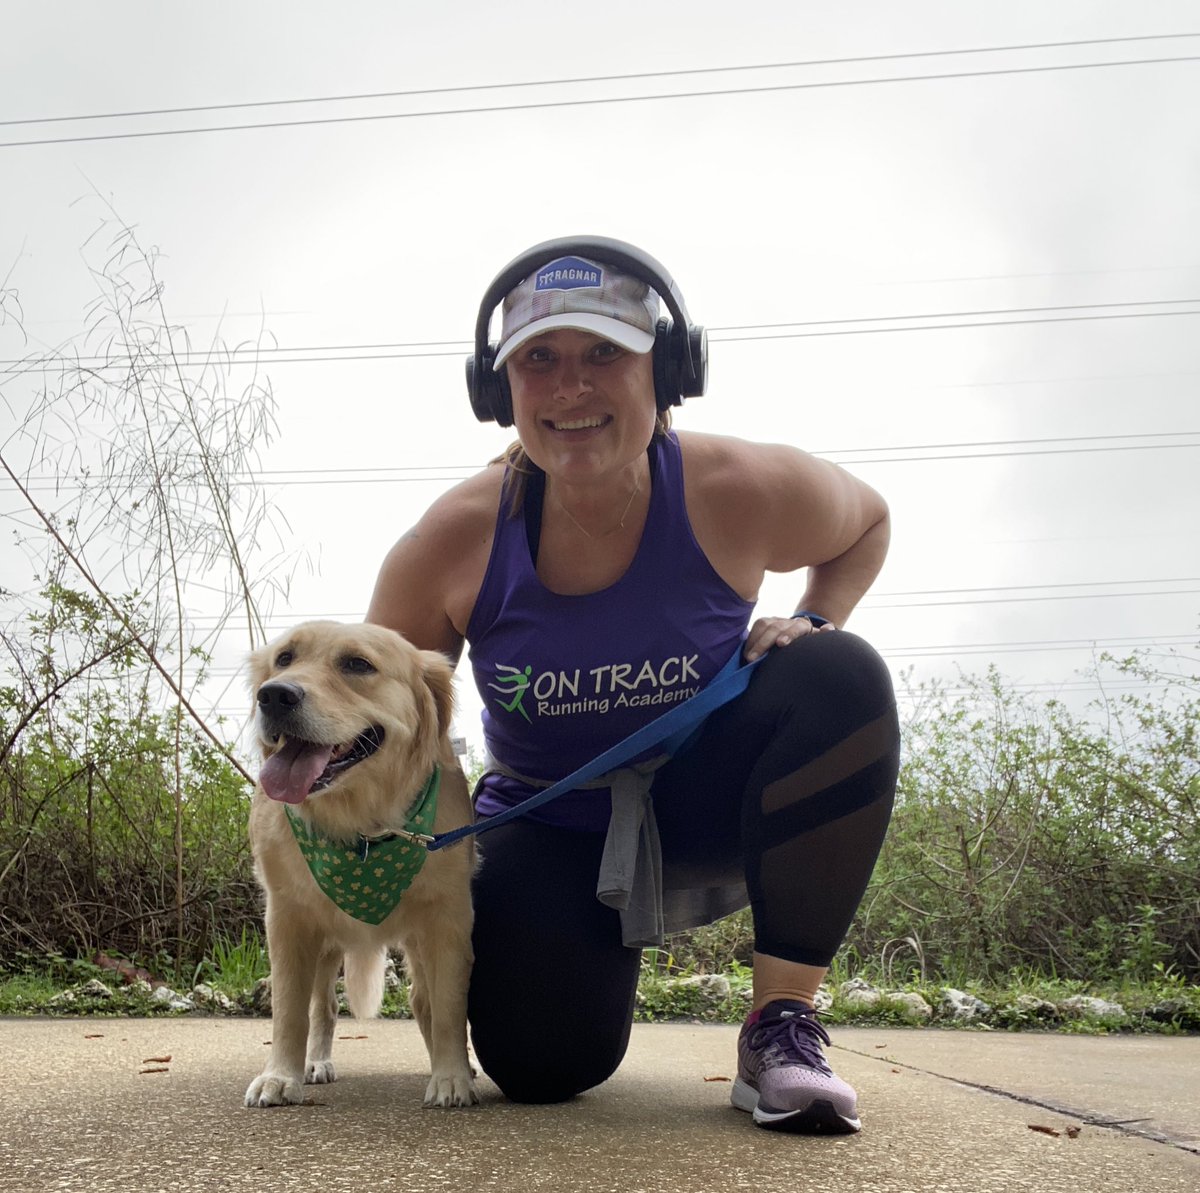 A few #morningmiles with my fave little running buddy 🐕 

I’m really enjoying these runs with her and want to get in as many as I can before it gets too hot for her. 

Do you run with your dog? What tips do you have for me as Luna and I learn together? 

#runningwithdogs